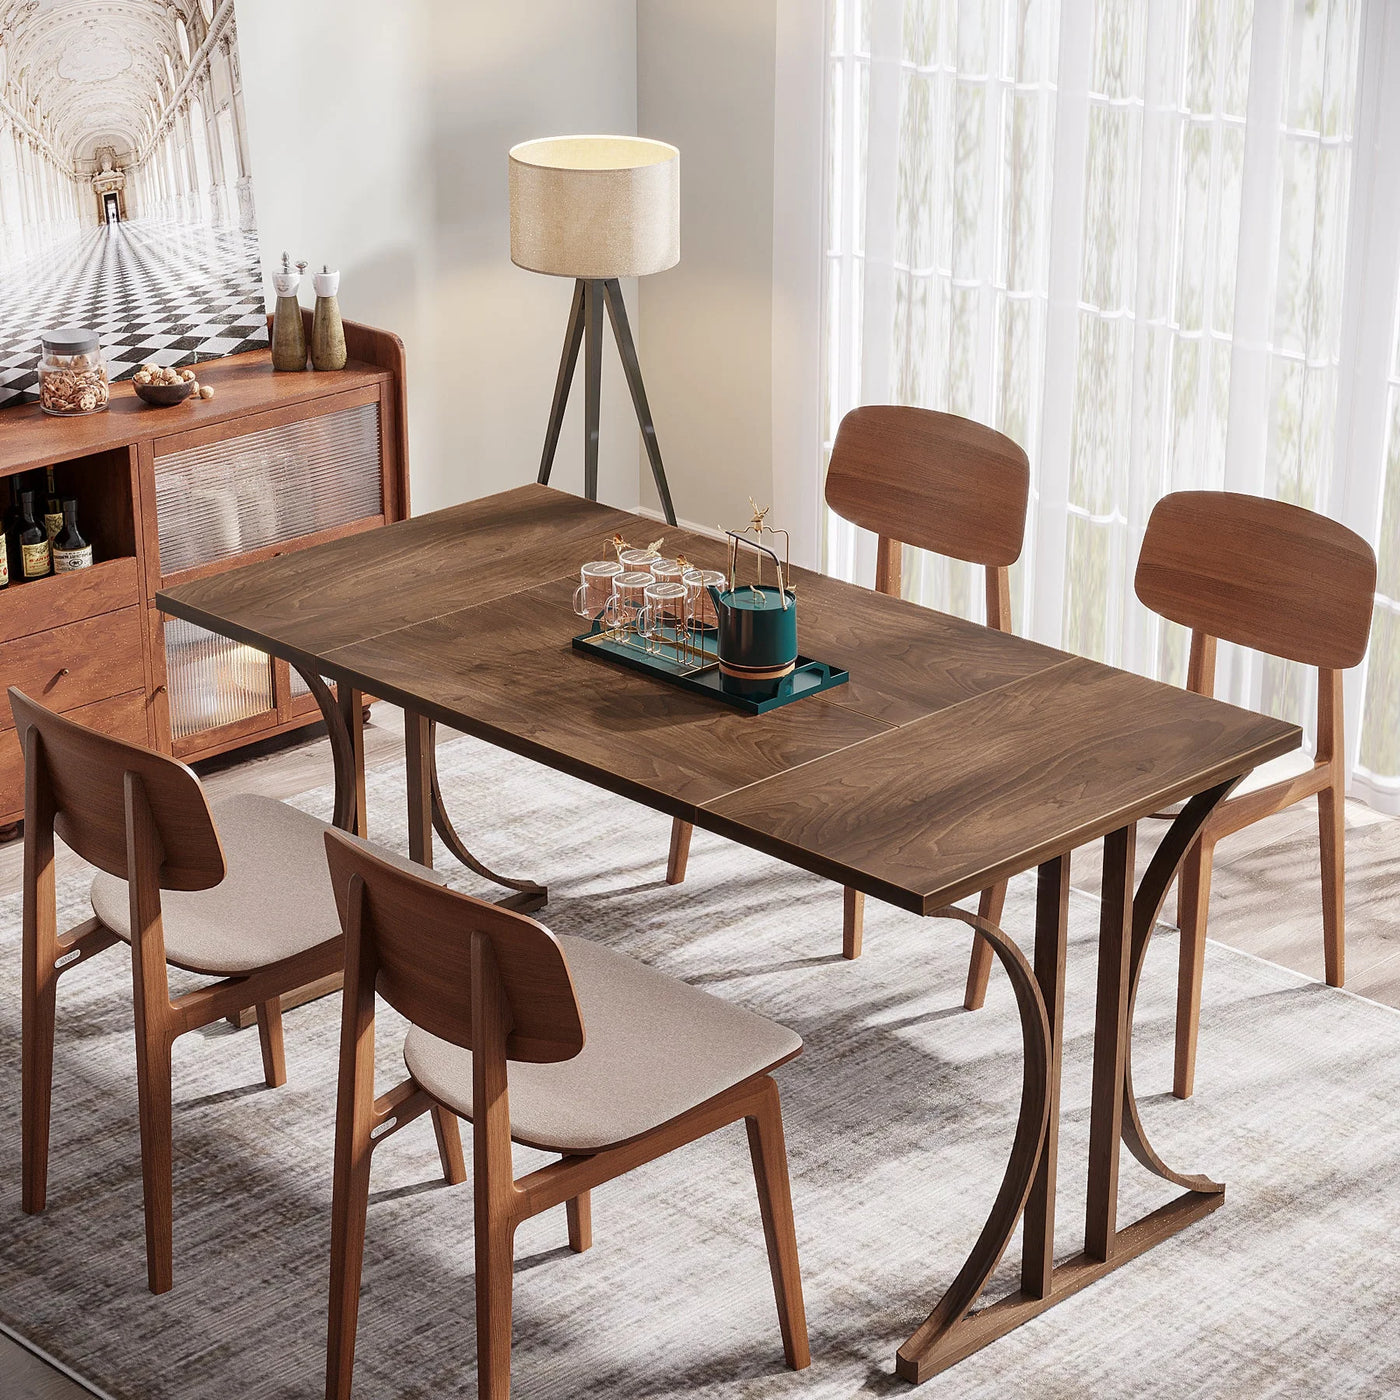 Sienta Wooden Dining Table | Rectangular Kitchen Table for 4 to 6 People